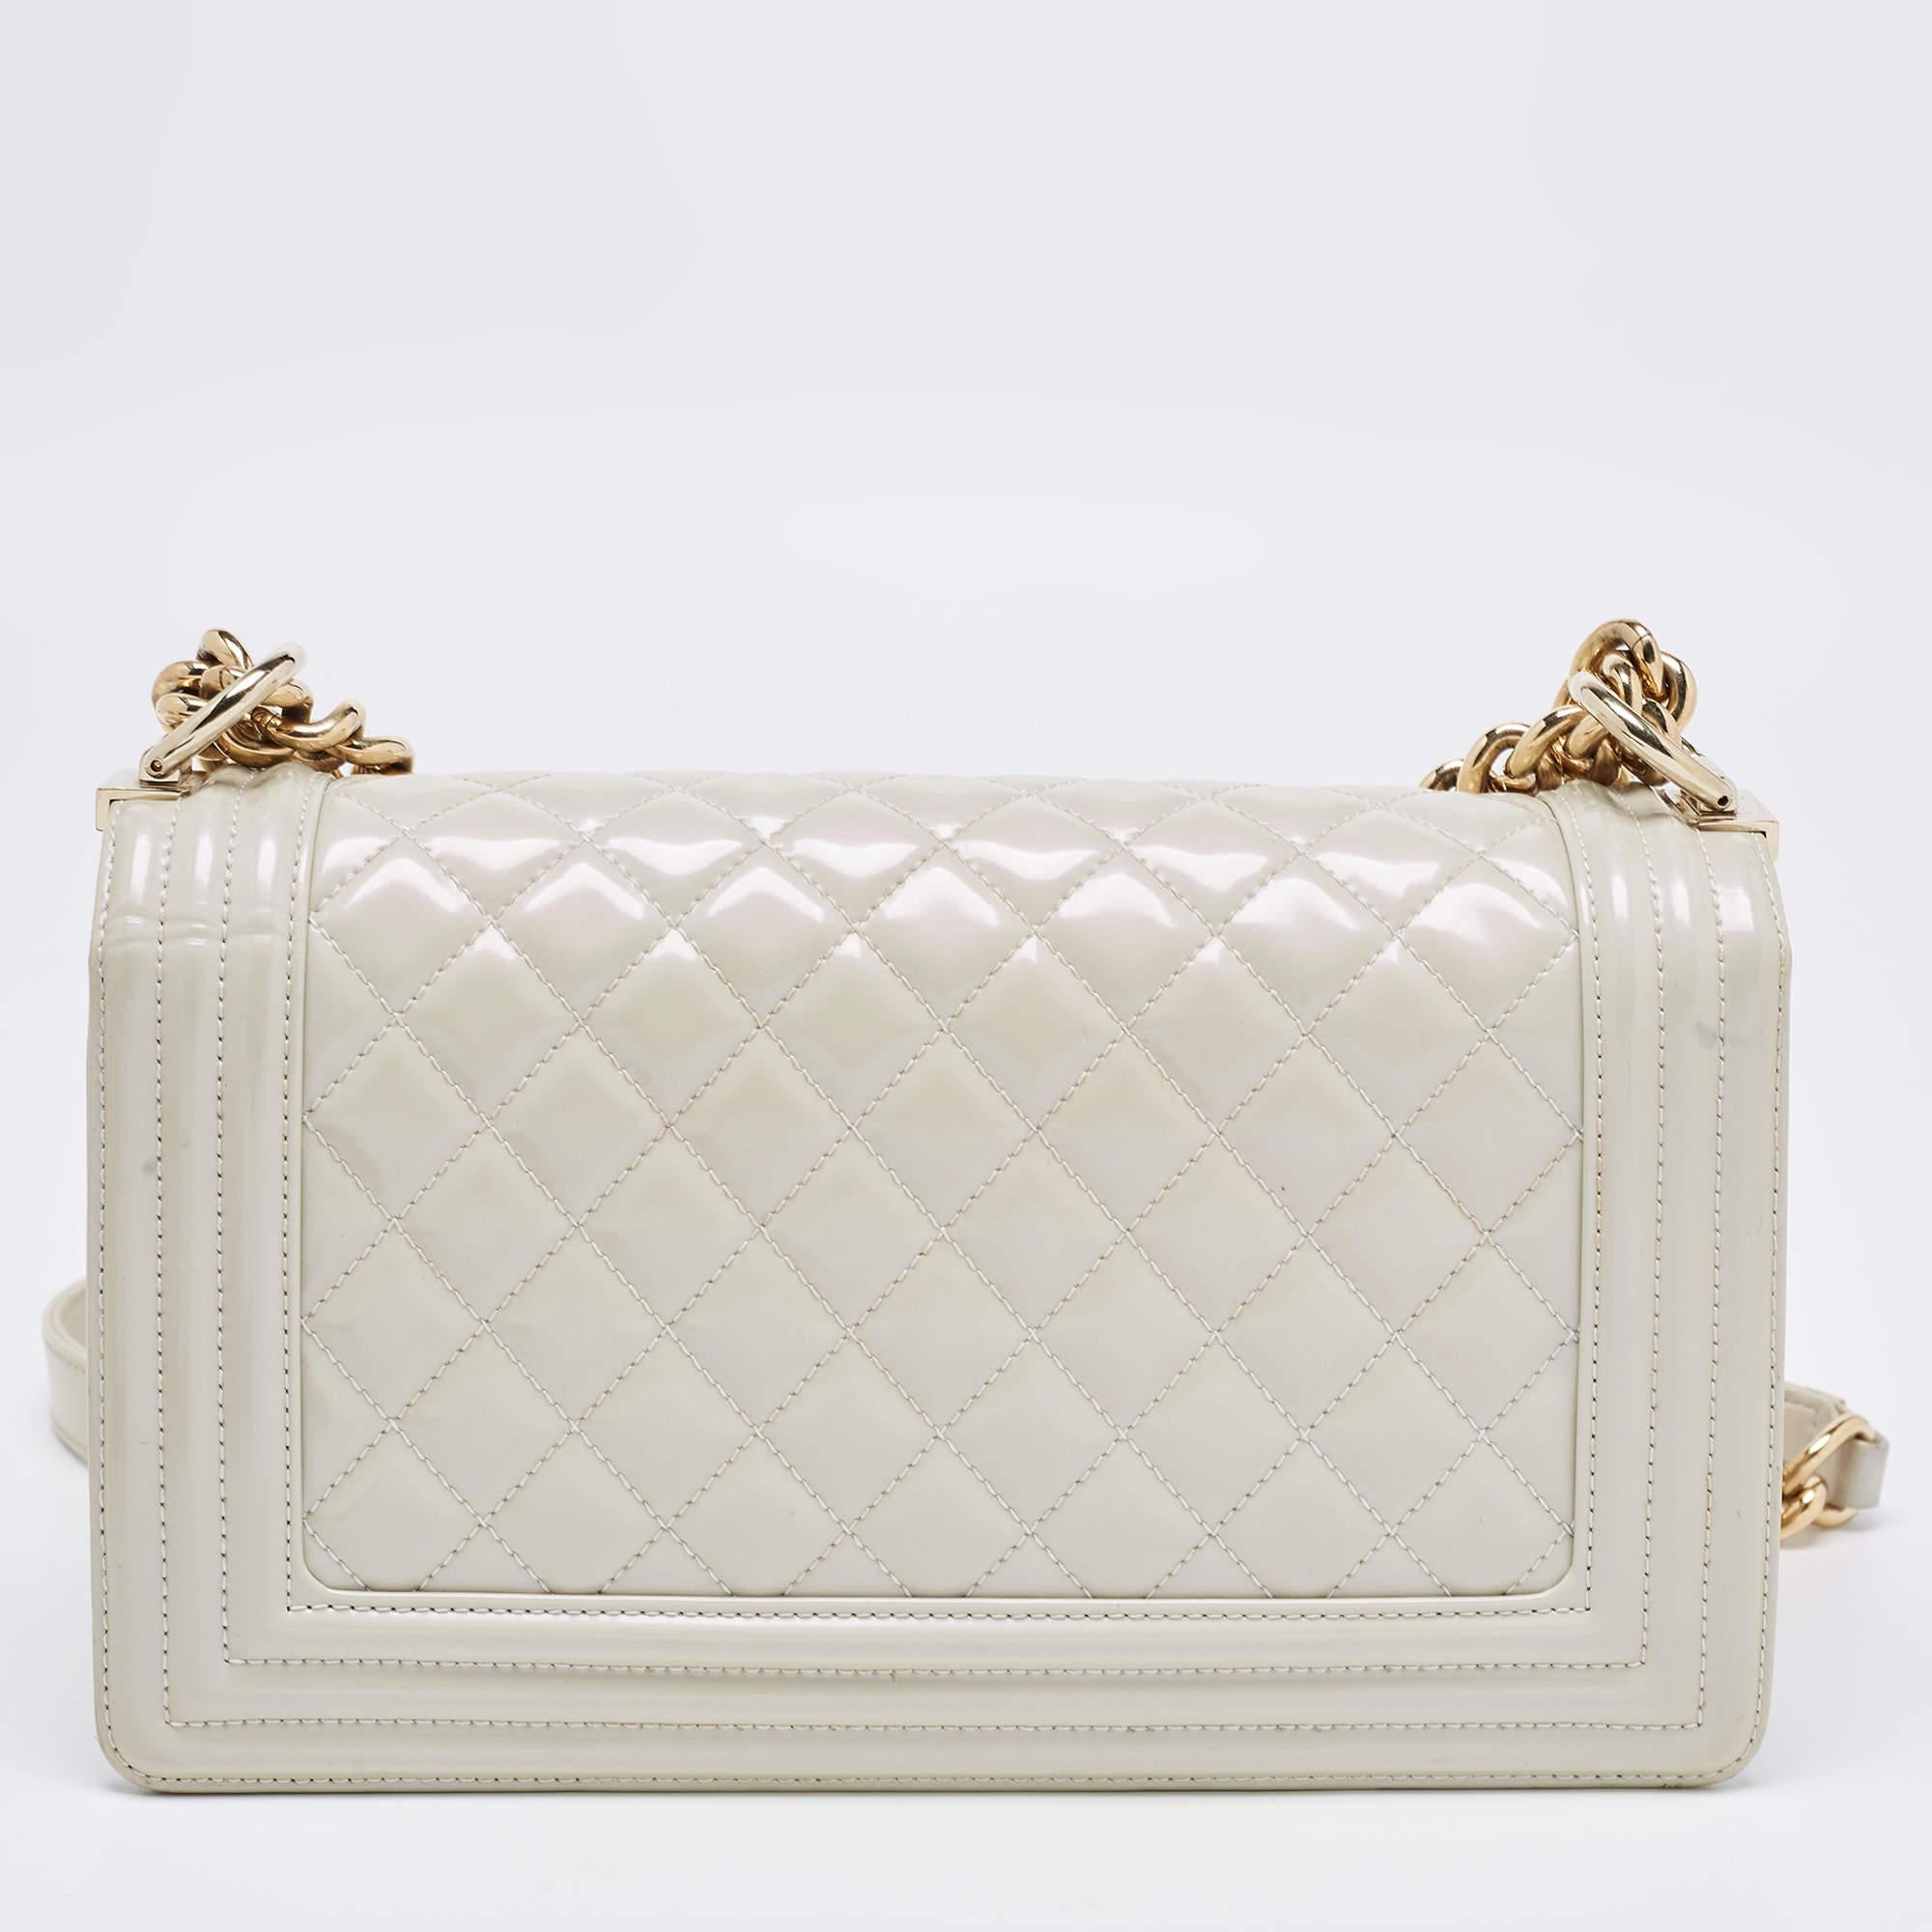 Chanel Pearl White Quilted Patent Leather Medium Boy Flap Bag In Fair Condition For Sale In Dubai, Al Qouz 2